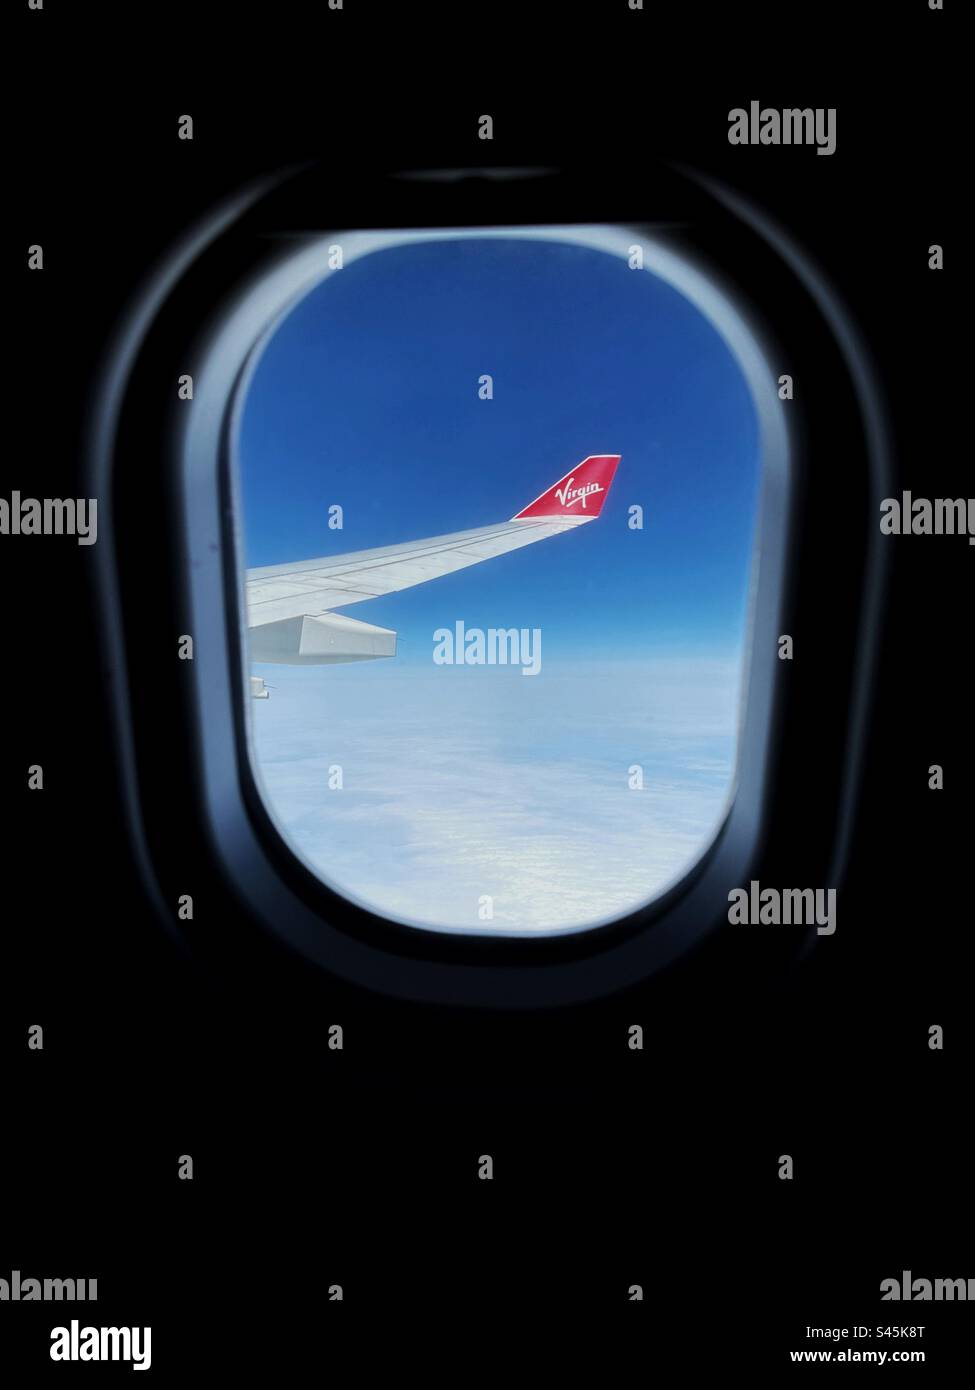 Wing tip of a Virgin Atlantic Airways jet at cruising altitude with the view framed by the aircraft window. Stock Photo